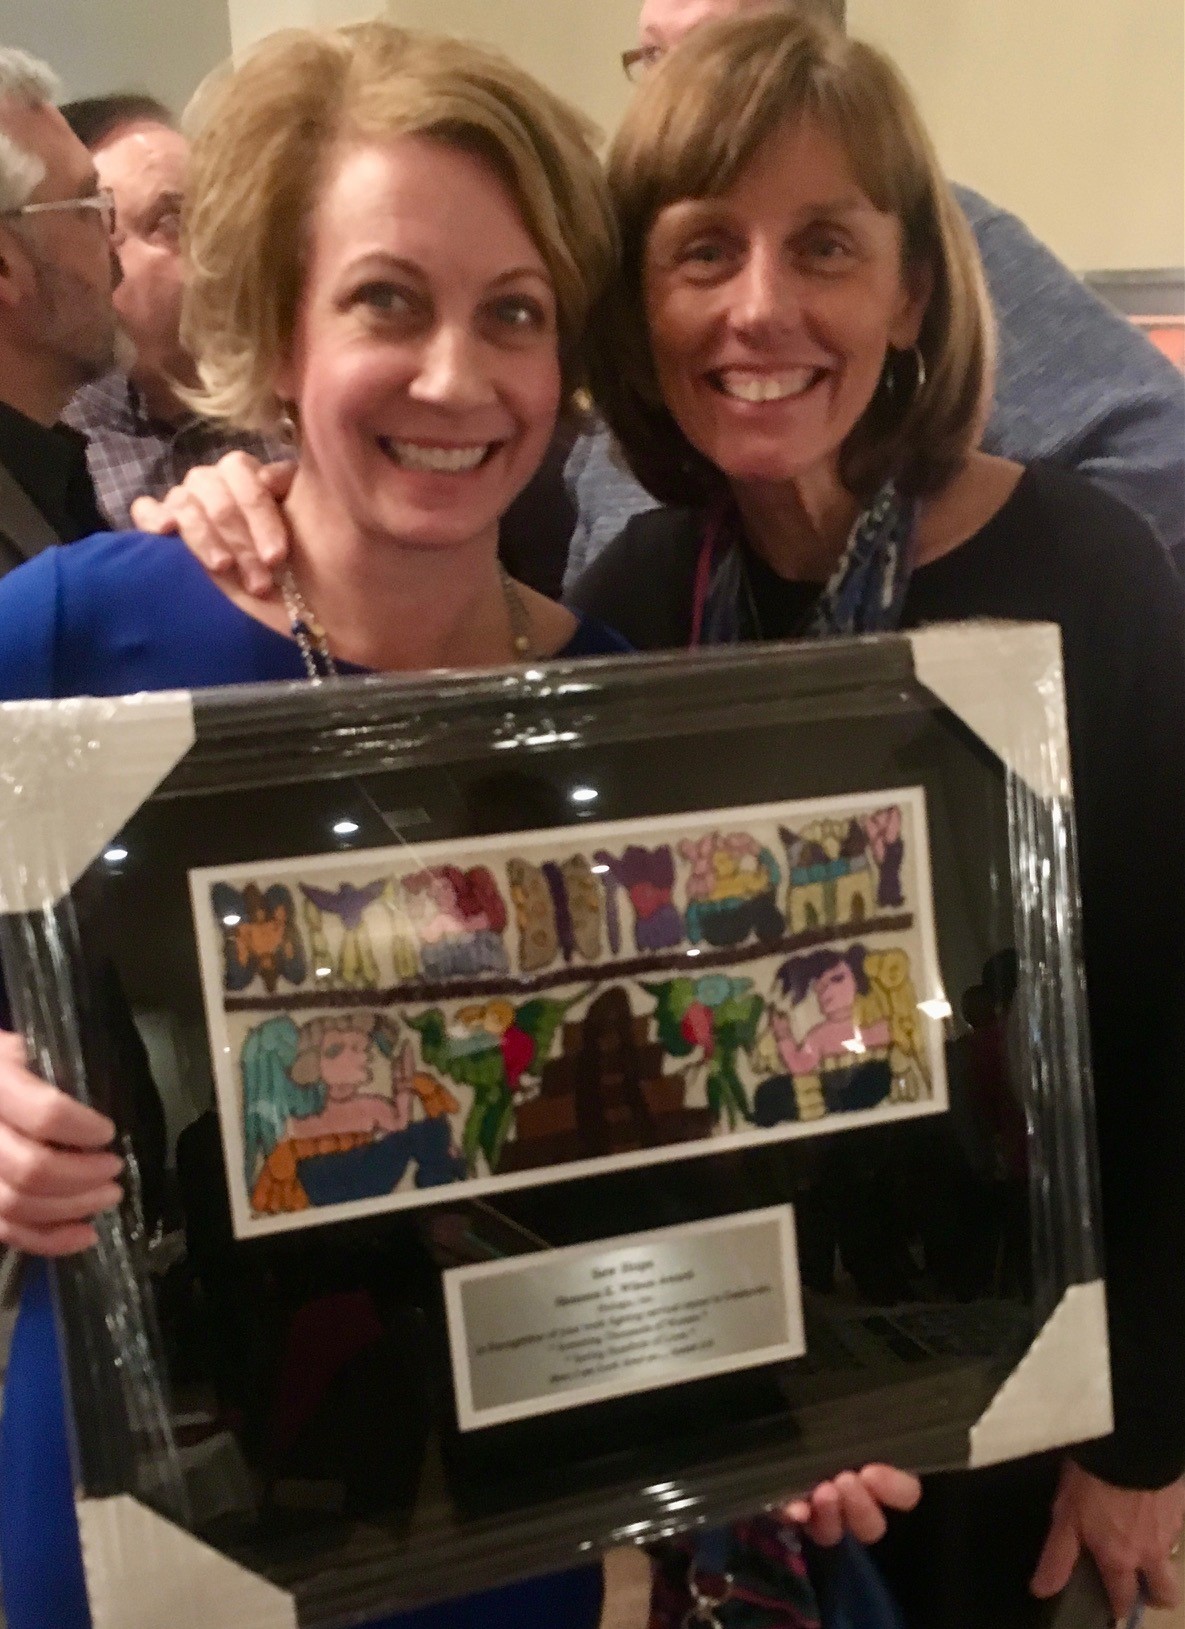 Rhonda Blue and Dr. Anne Ruch with plaque recognizing Hologic support for SewHope.